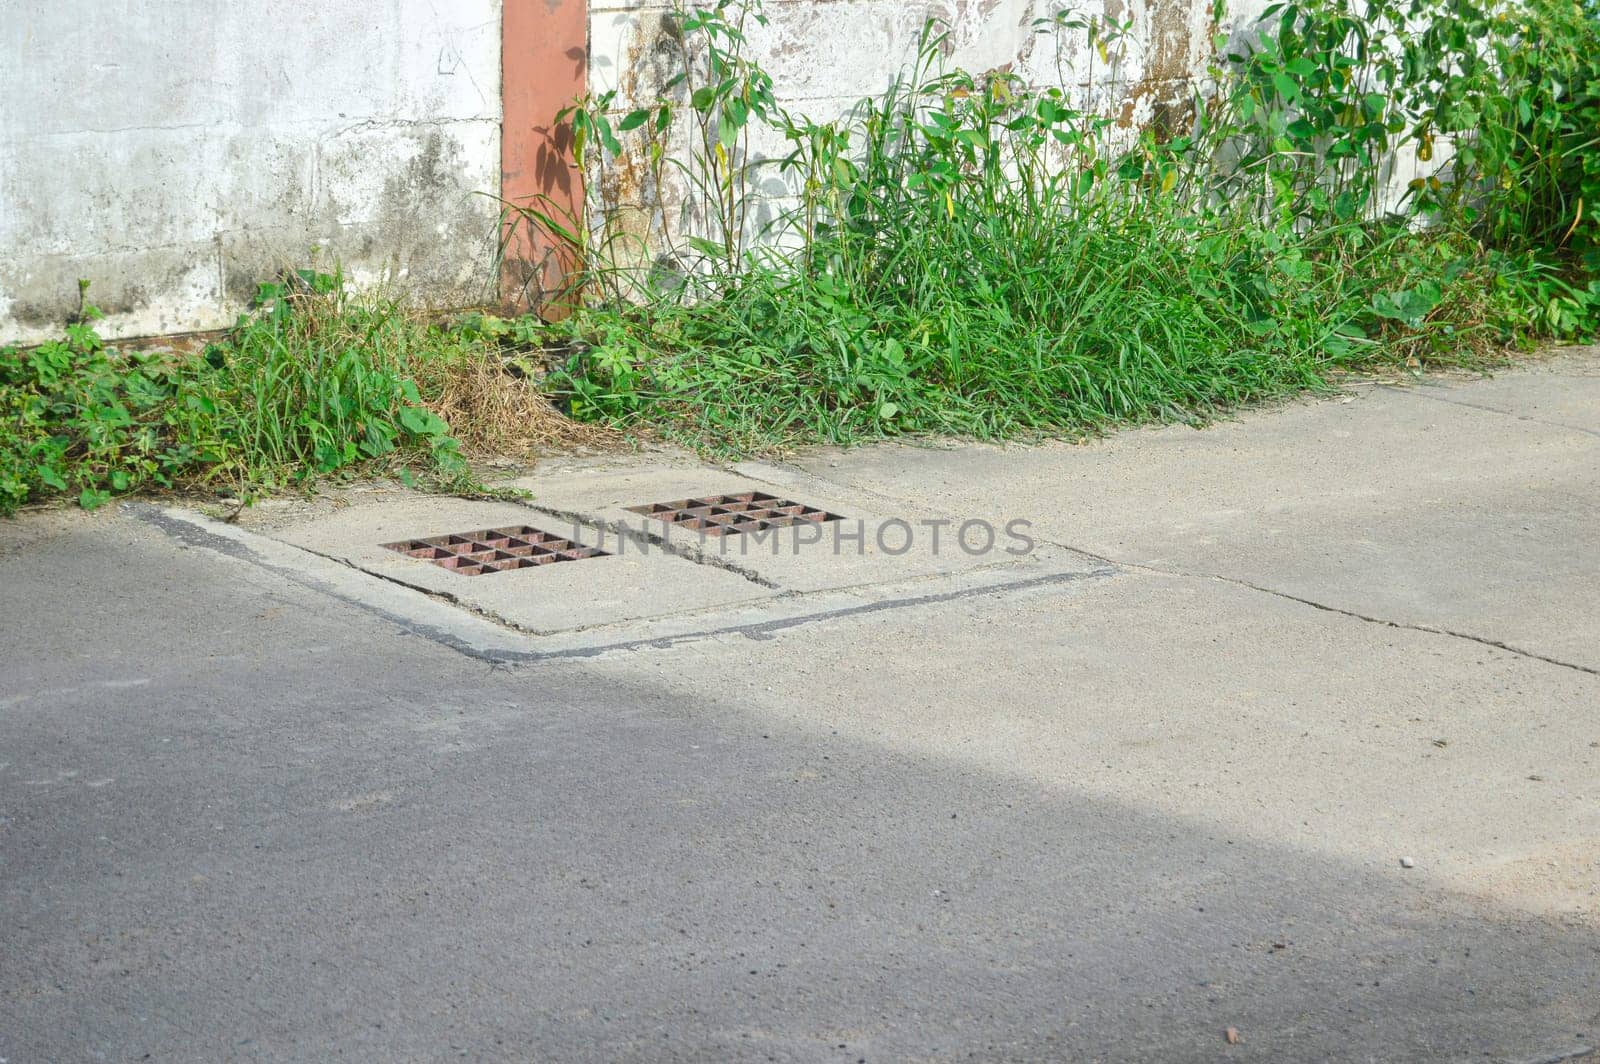 The manhole cover viewed from a distance. by boonruen